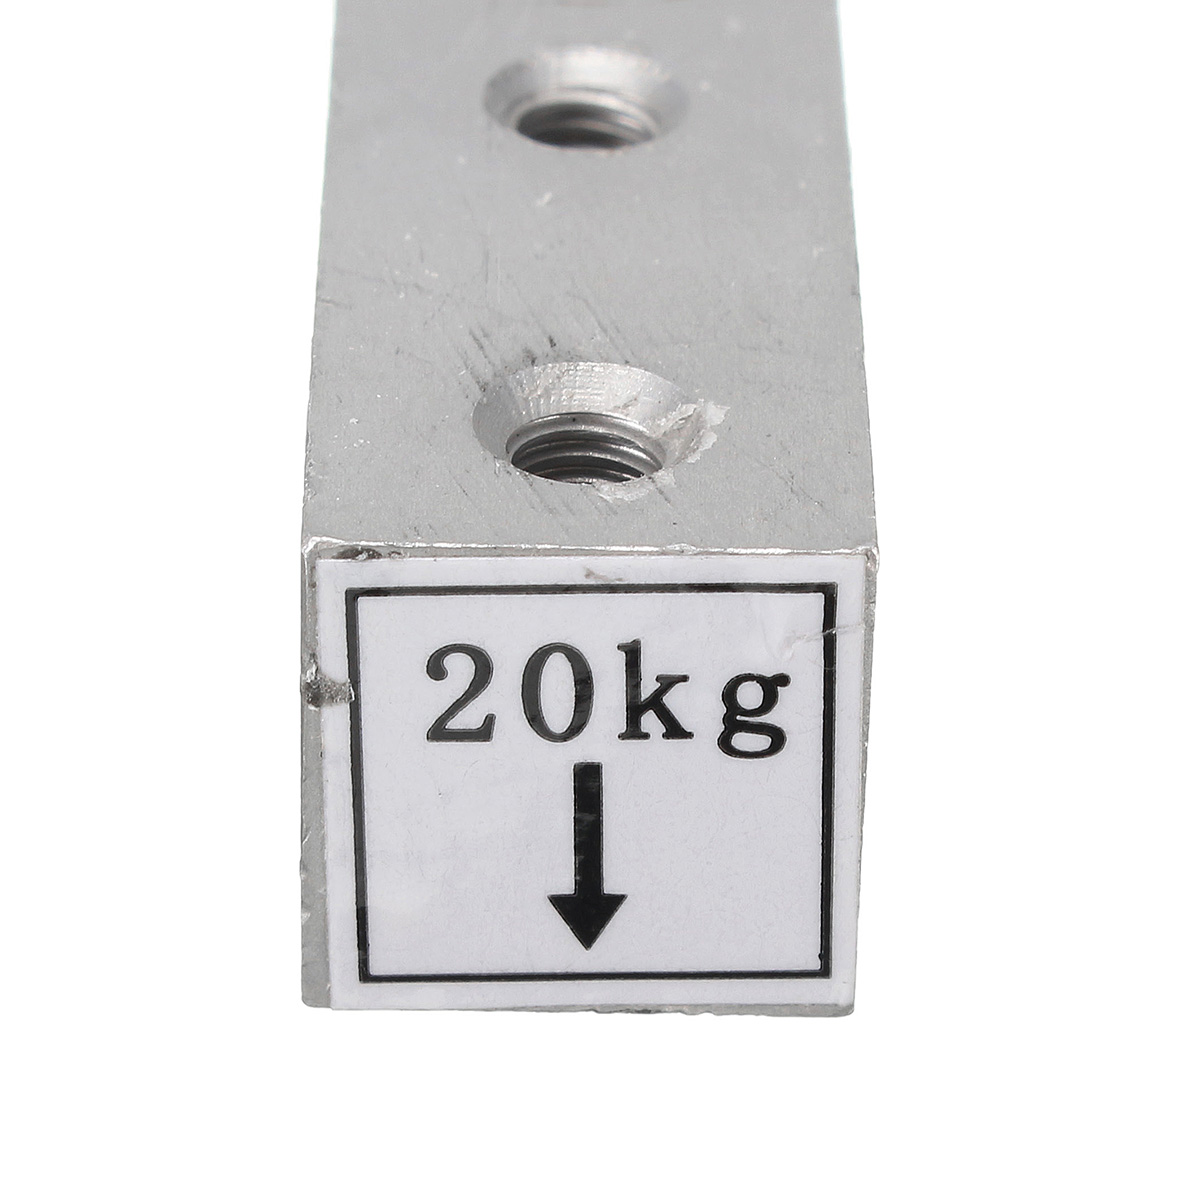 HX711-Module--20kg-Aluminum-Alloy-Scale-Weighing-Sensor-Load-Cell-Kit-1112121-3